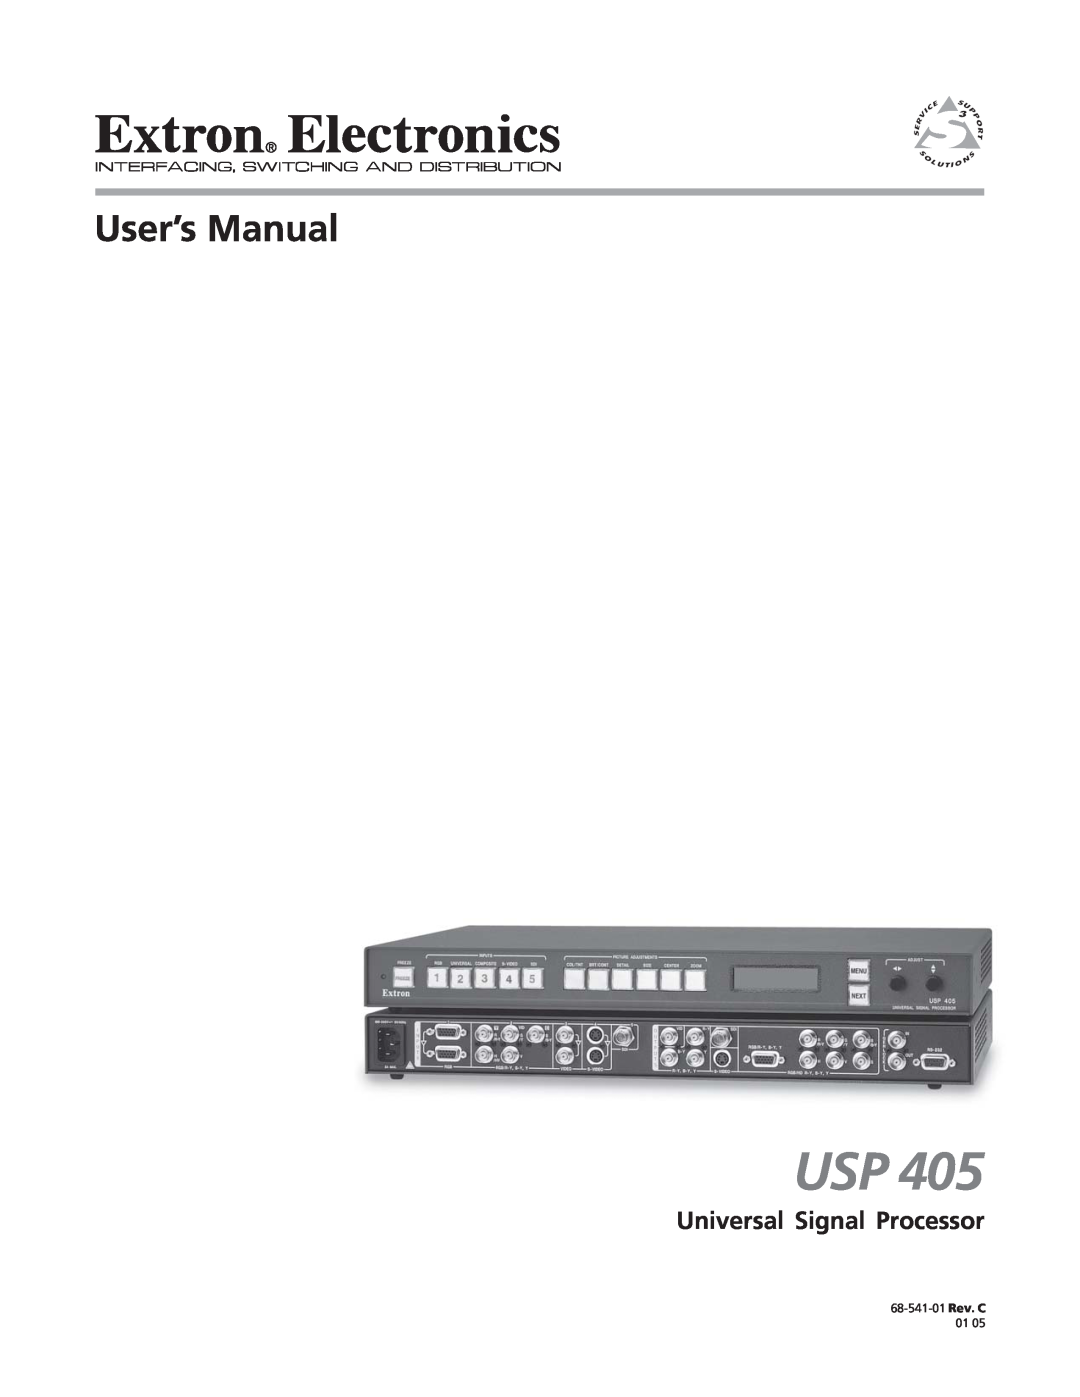 Extron electronic USP 405 specifications Video input, Video processing, Video output, Specifications - USP 